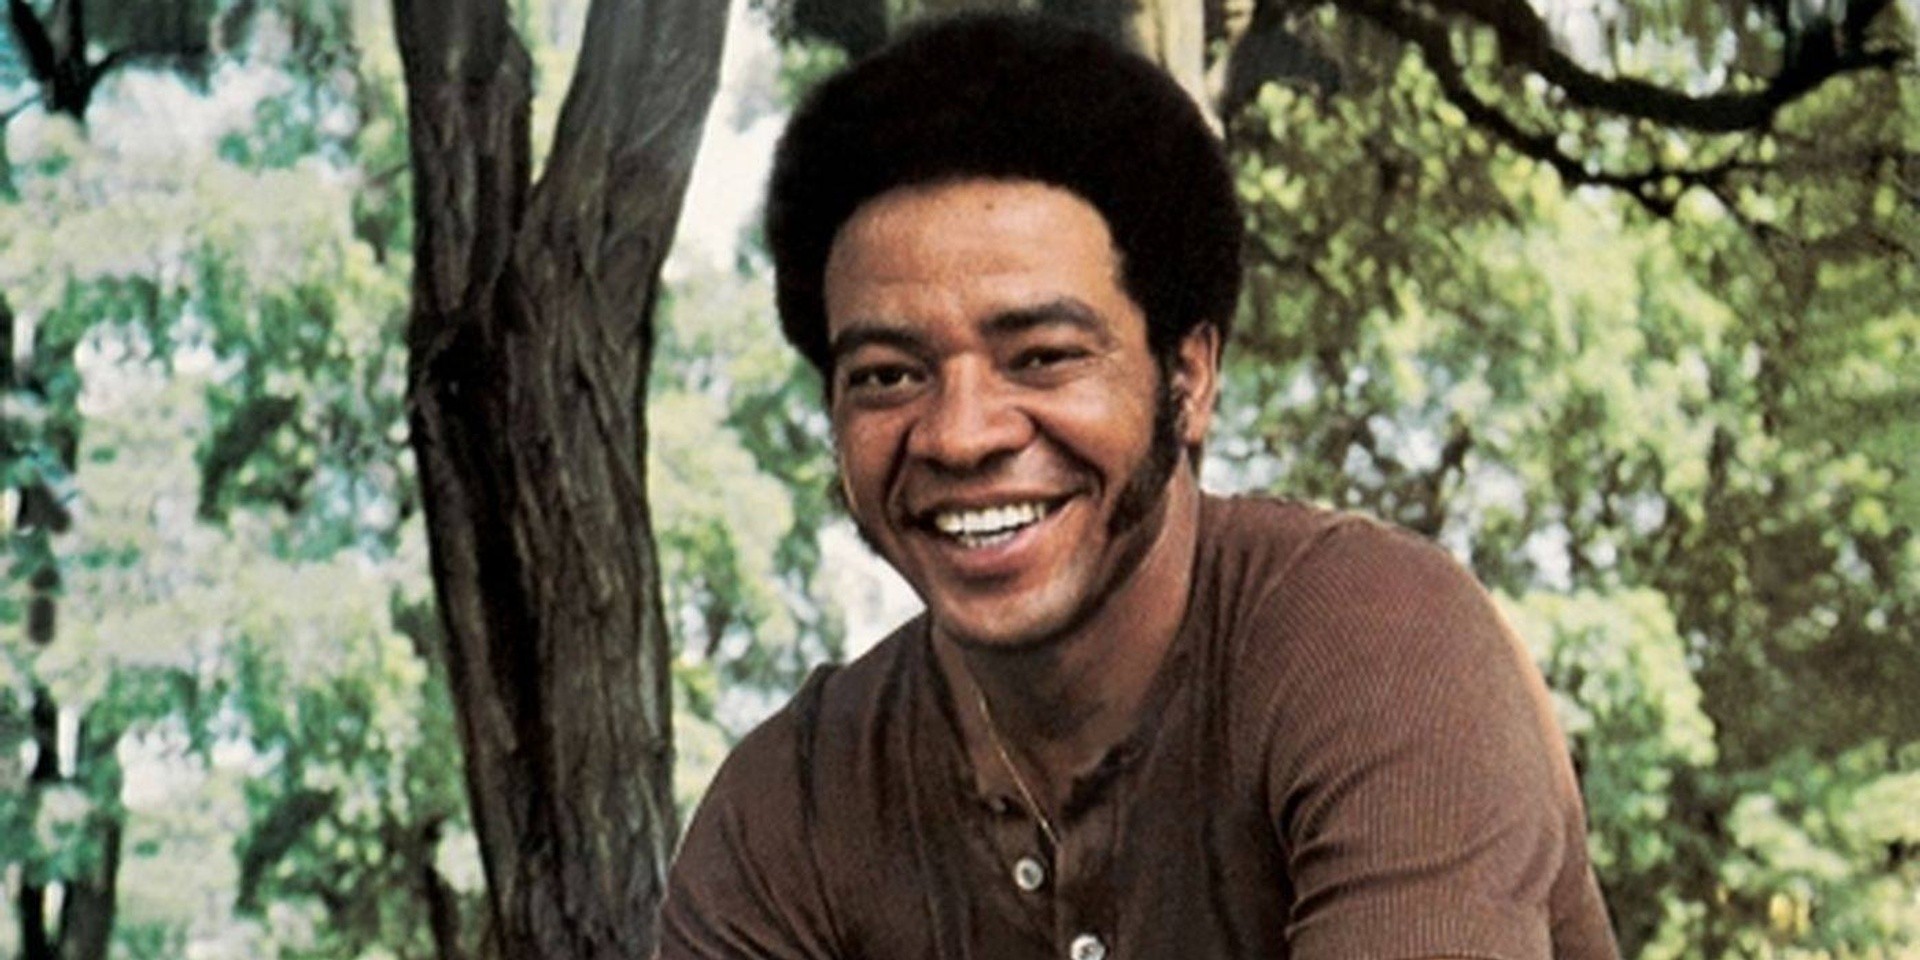 Soul icon and 'Lovely Day' singer Bill Withers passes away at 81